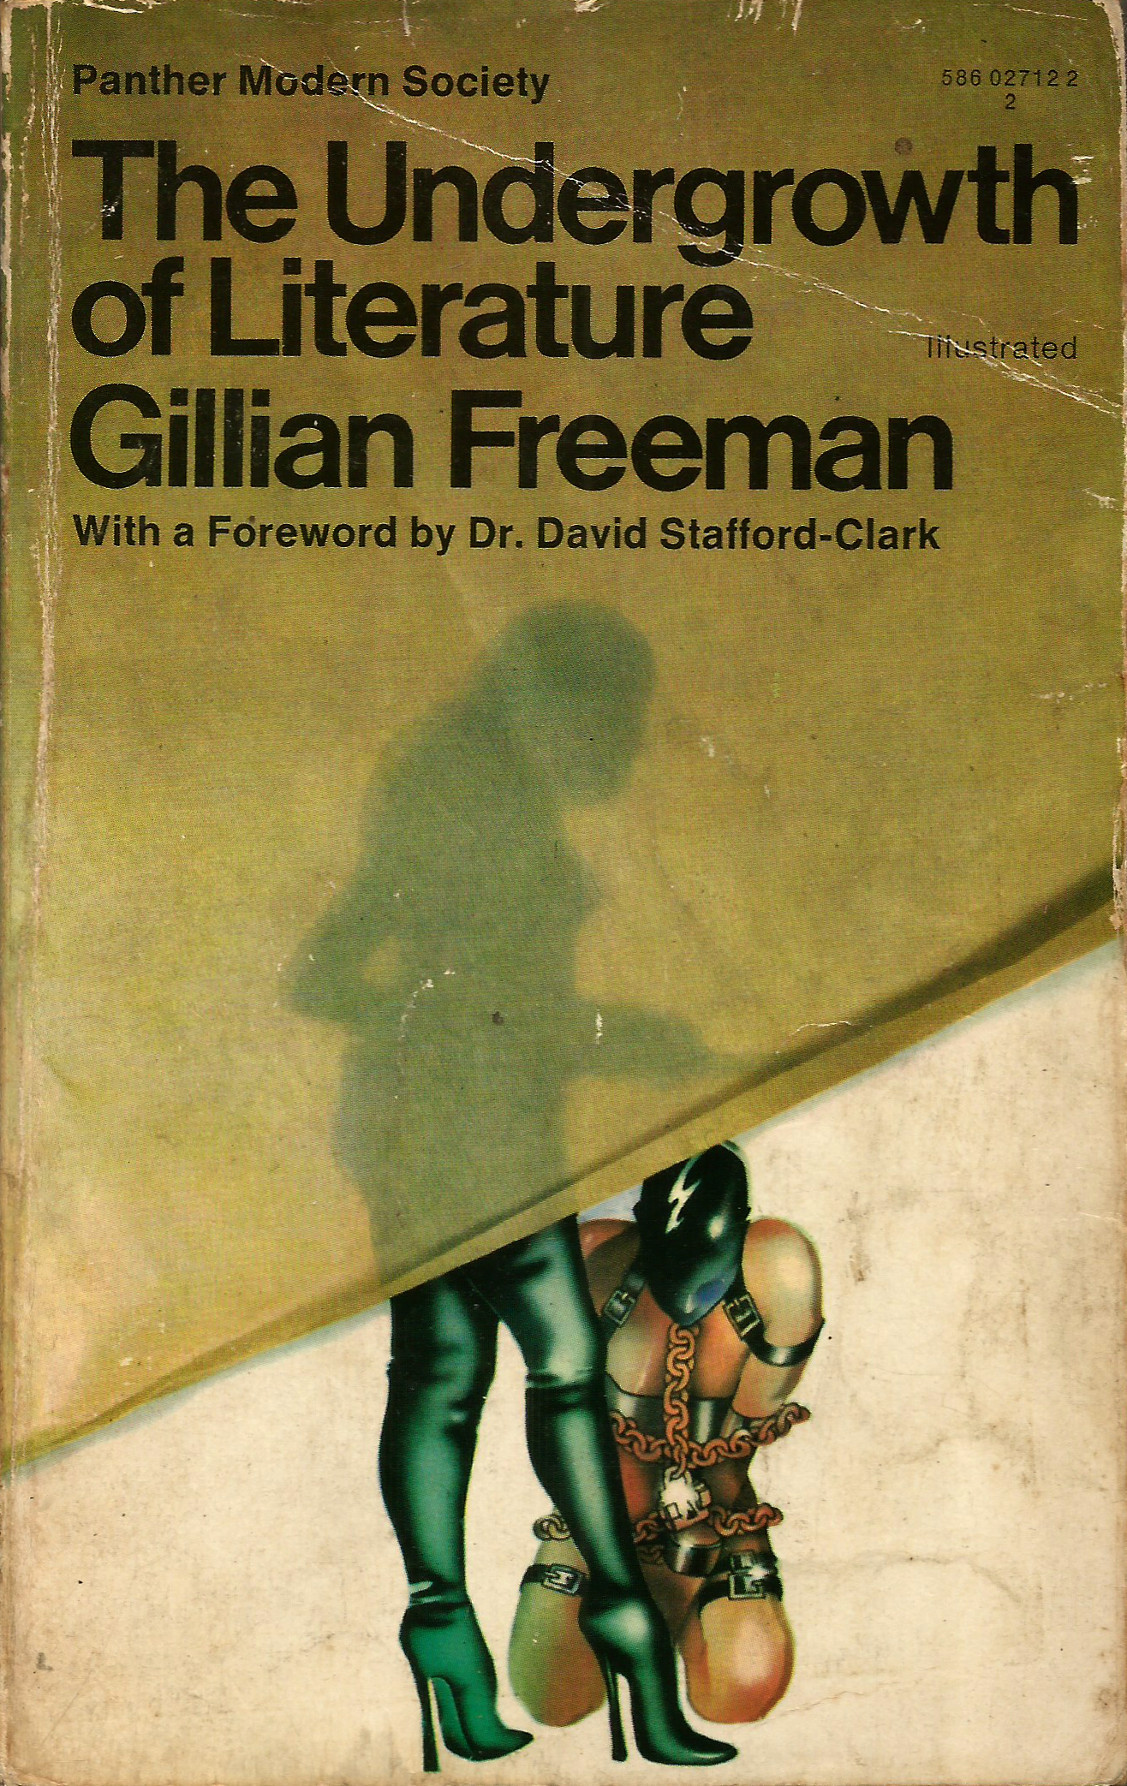 The Undergrowth of Literature, by Gillian Freeman (Panther Books, 1972). From a charity